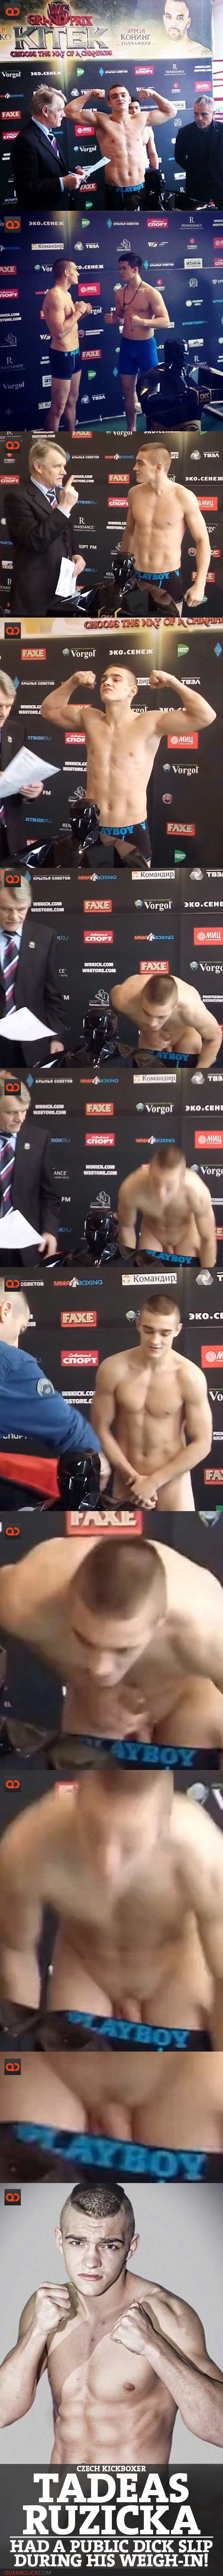 Tadeas Ruzicka, Czech KickBoxer, Had A Public Dick Slip During His Weigh-in!